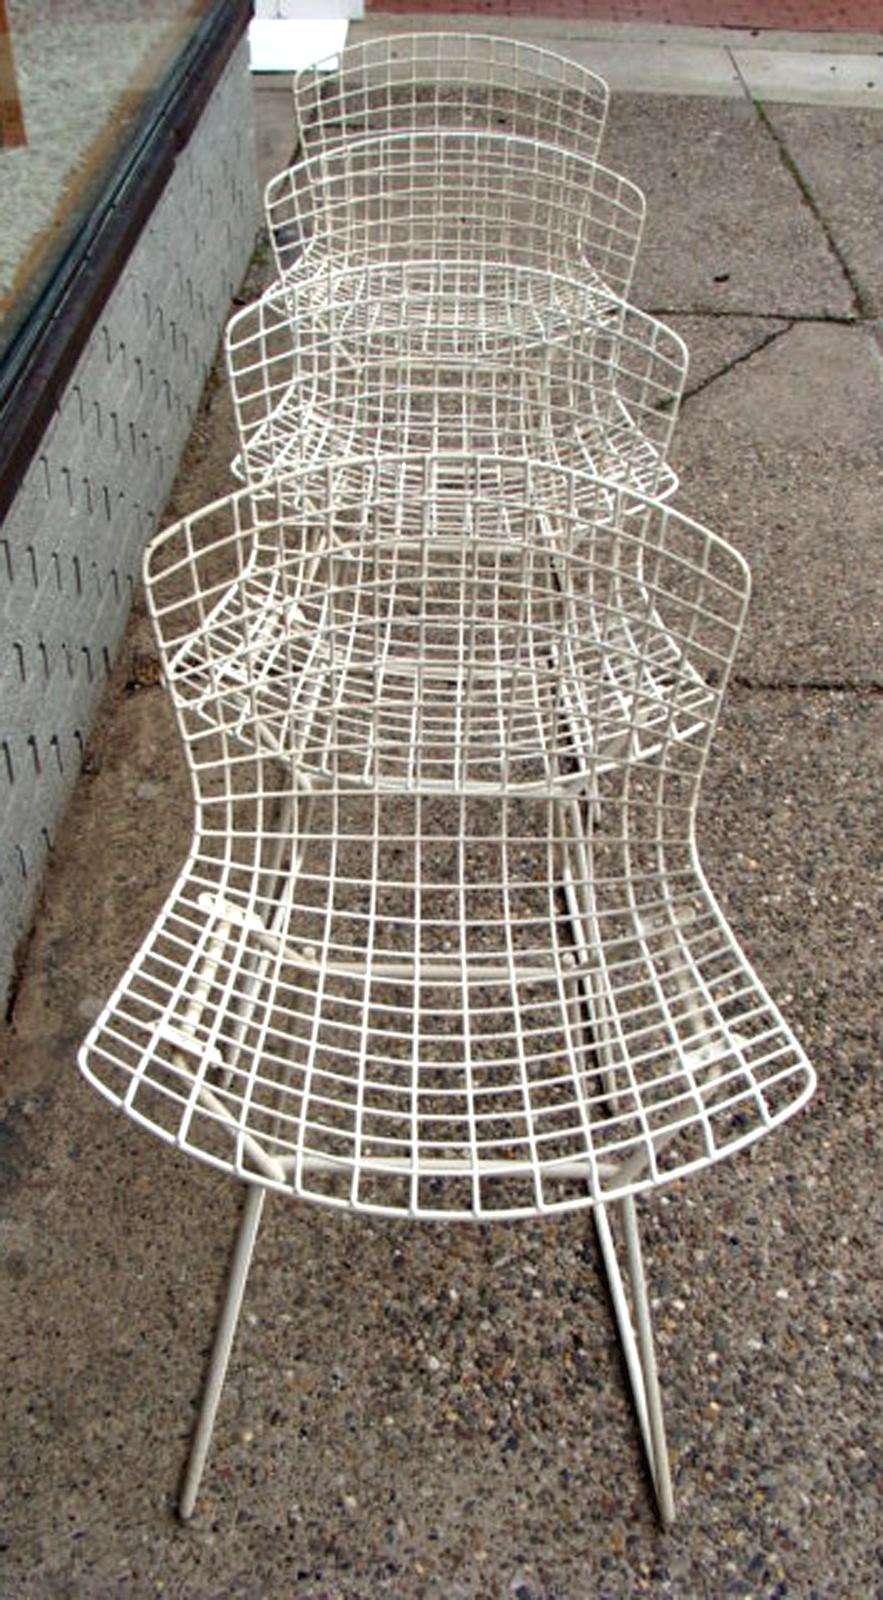 Set of 4 early production Knoll/ Harry Bertoia side chairs, circa 1955 in white. All original, great vintage condition. Very slight wear. Acquired from original owner. Seat pads long discarded but replacements are easily found online.